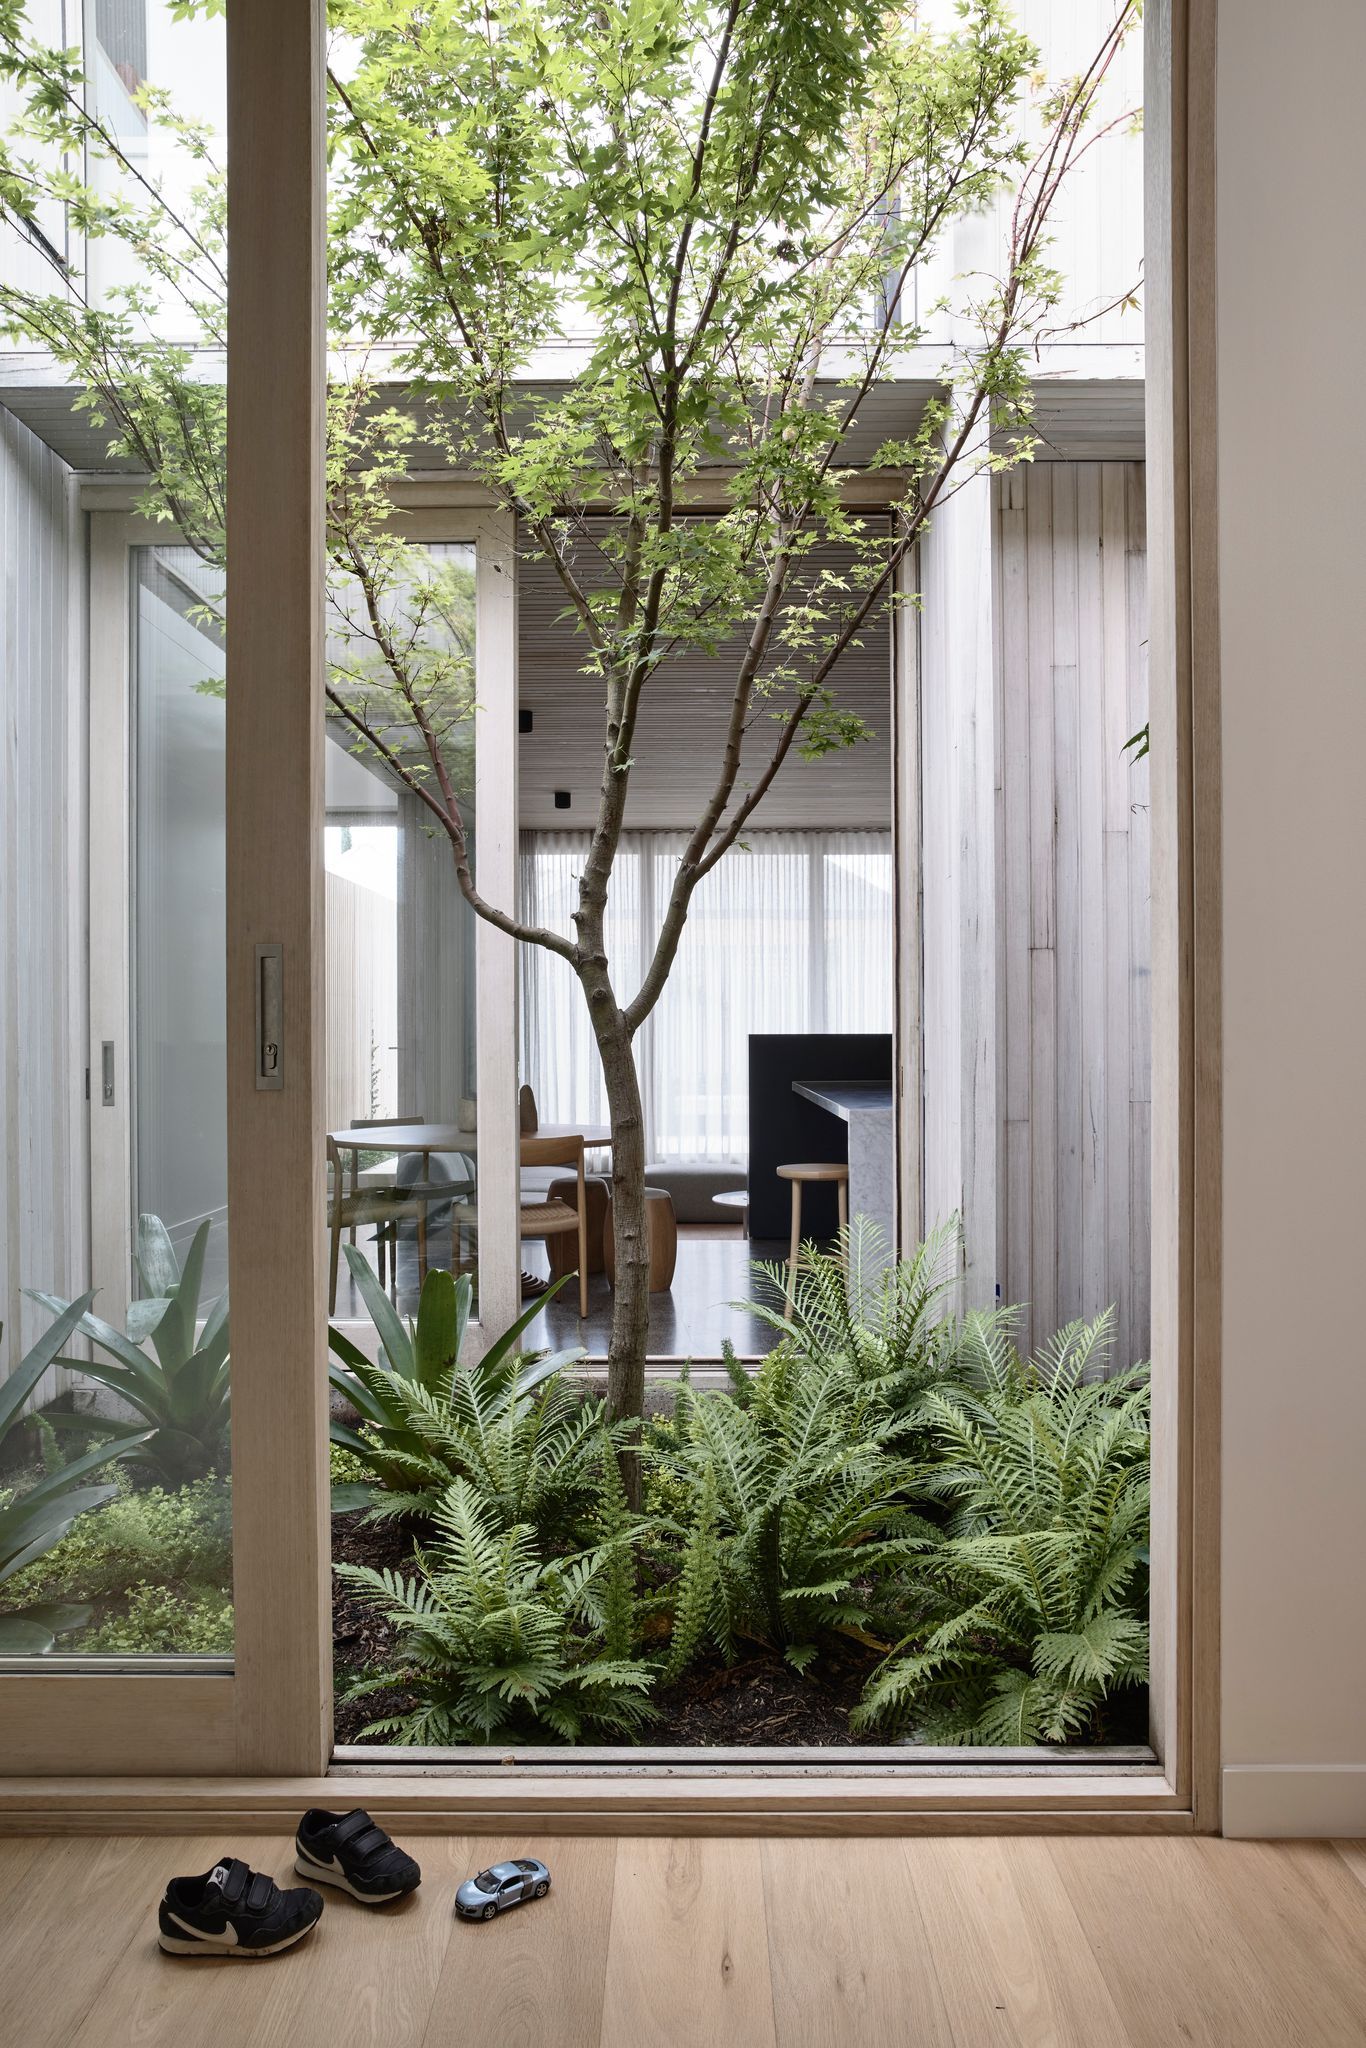 Silvertop House by Tom Robertson Architects. Timber sliding doors opening up to internal courtyard